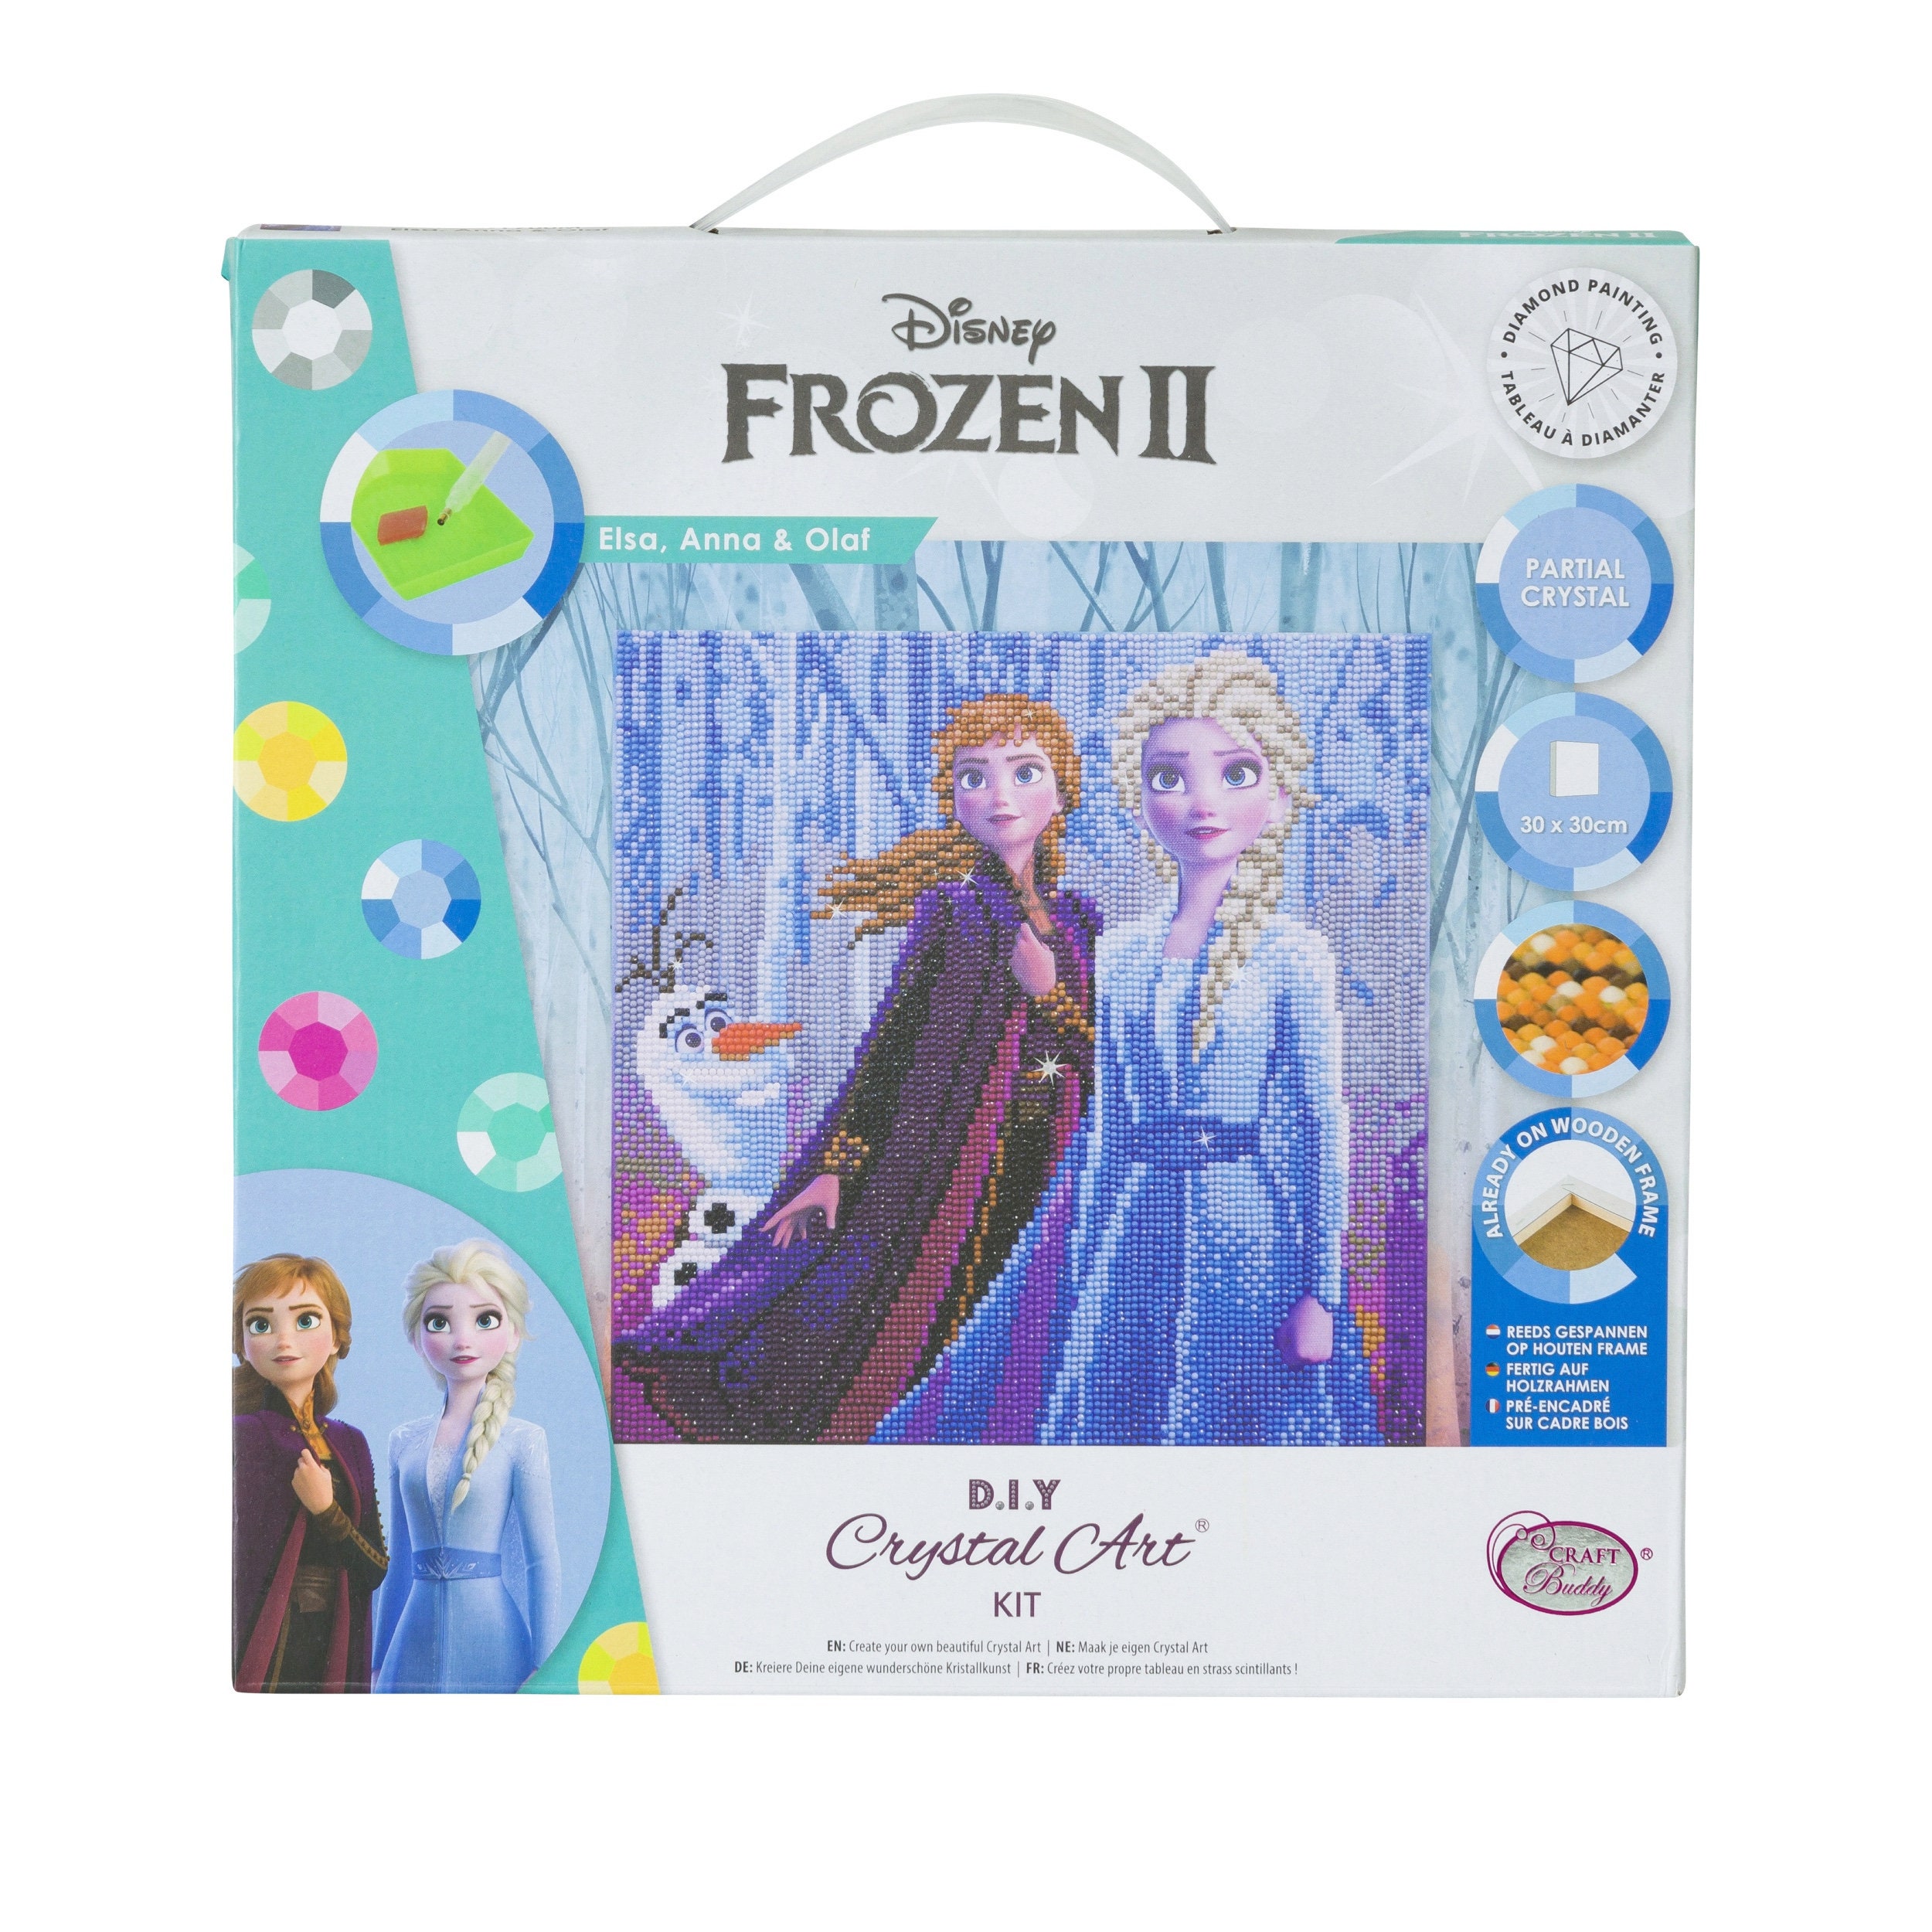 Disney Elsa Olaf & Cm Like Complete, Buddy, Anna Etsy Picture Ready Kong Painting Kit 30 Art Crystal to Craft - Once X by 30 Hang Hong Frozen Diamond DIY